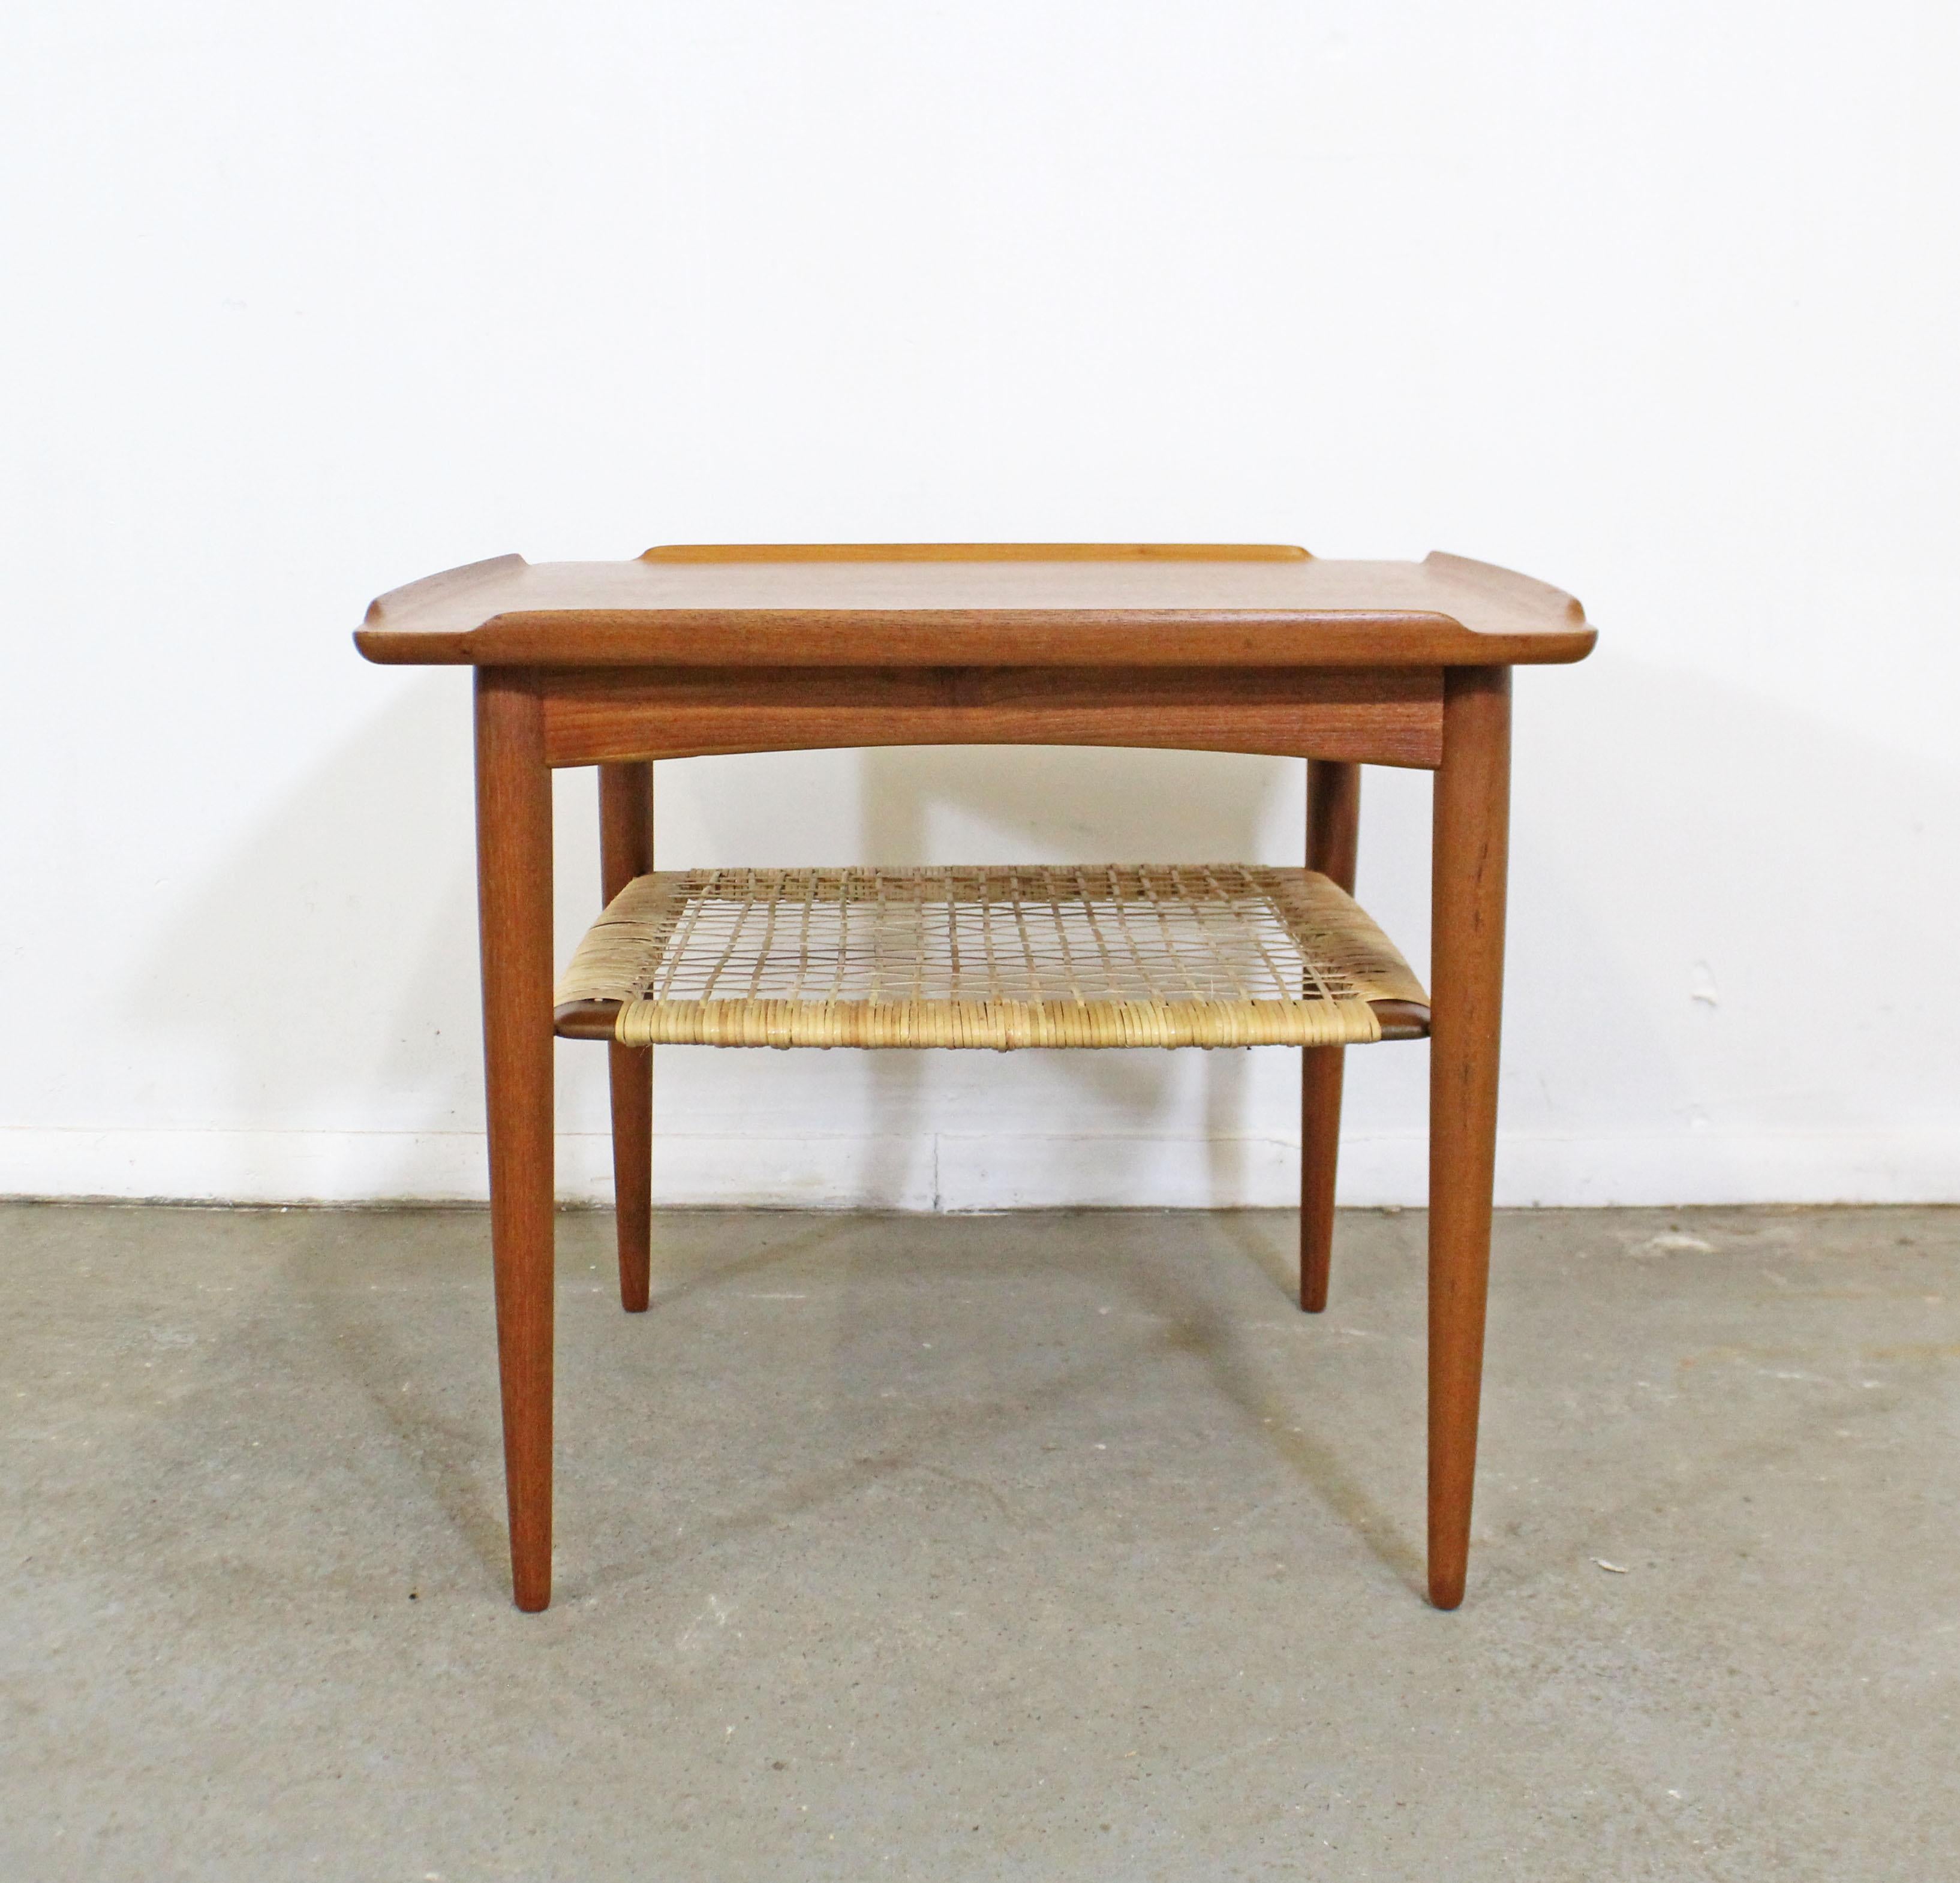 What a find! Offered is a Danish modern square table designed by Poul Jensen for Selig. The table is made of teak with a caned shelf that has been professionally restored. It is in excellent condition with little to no wear. It is not signed. Check